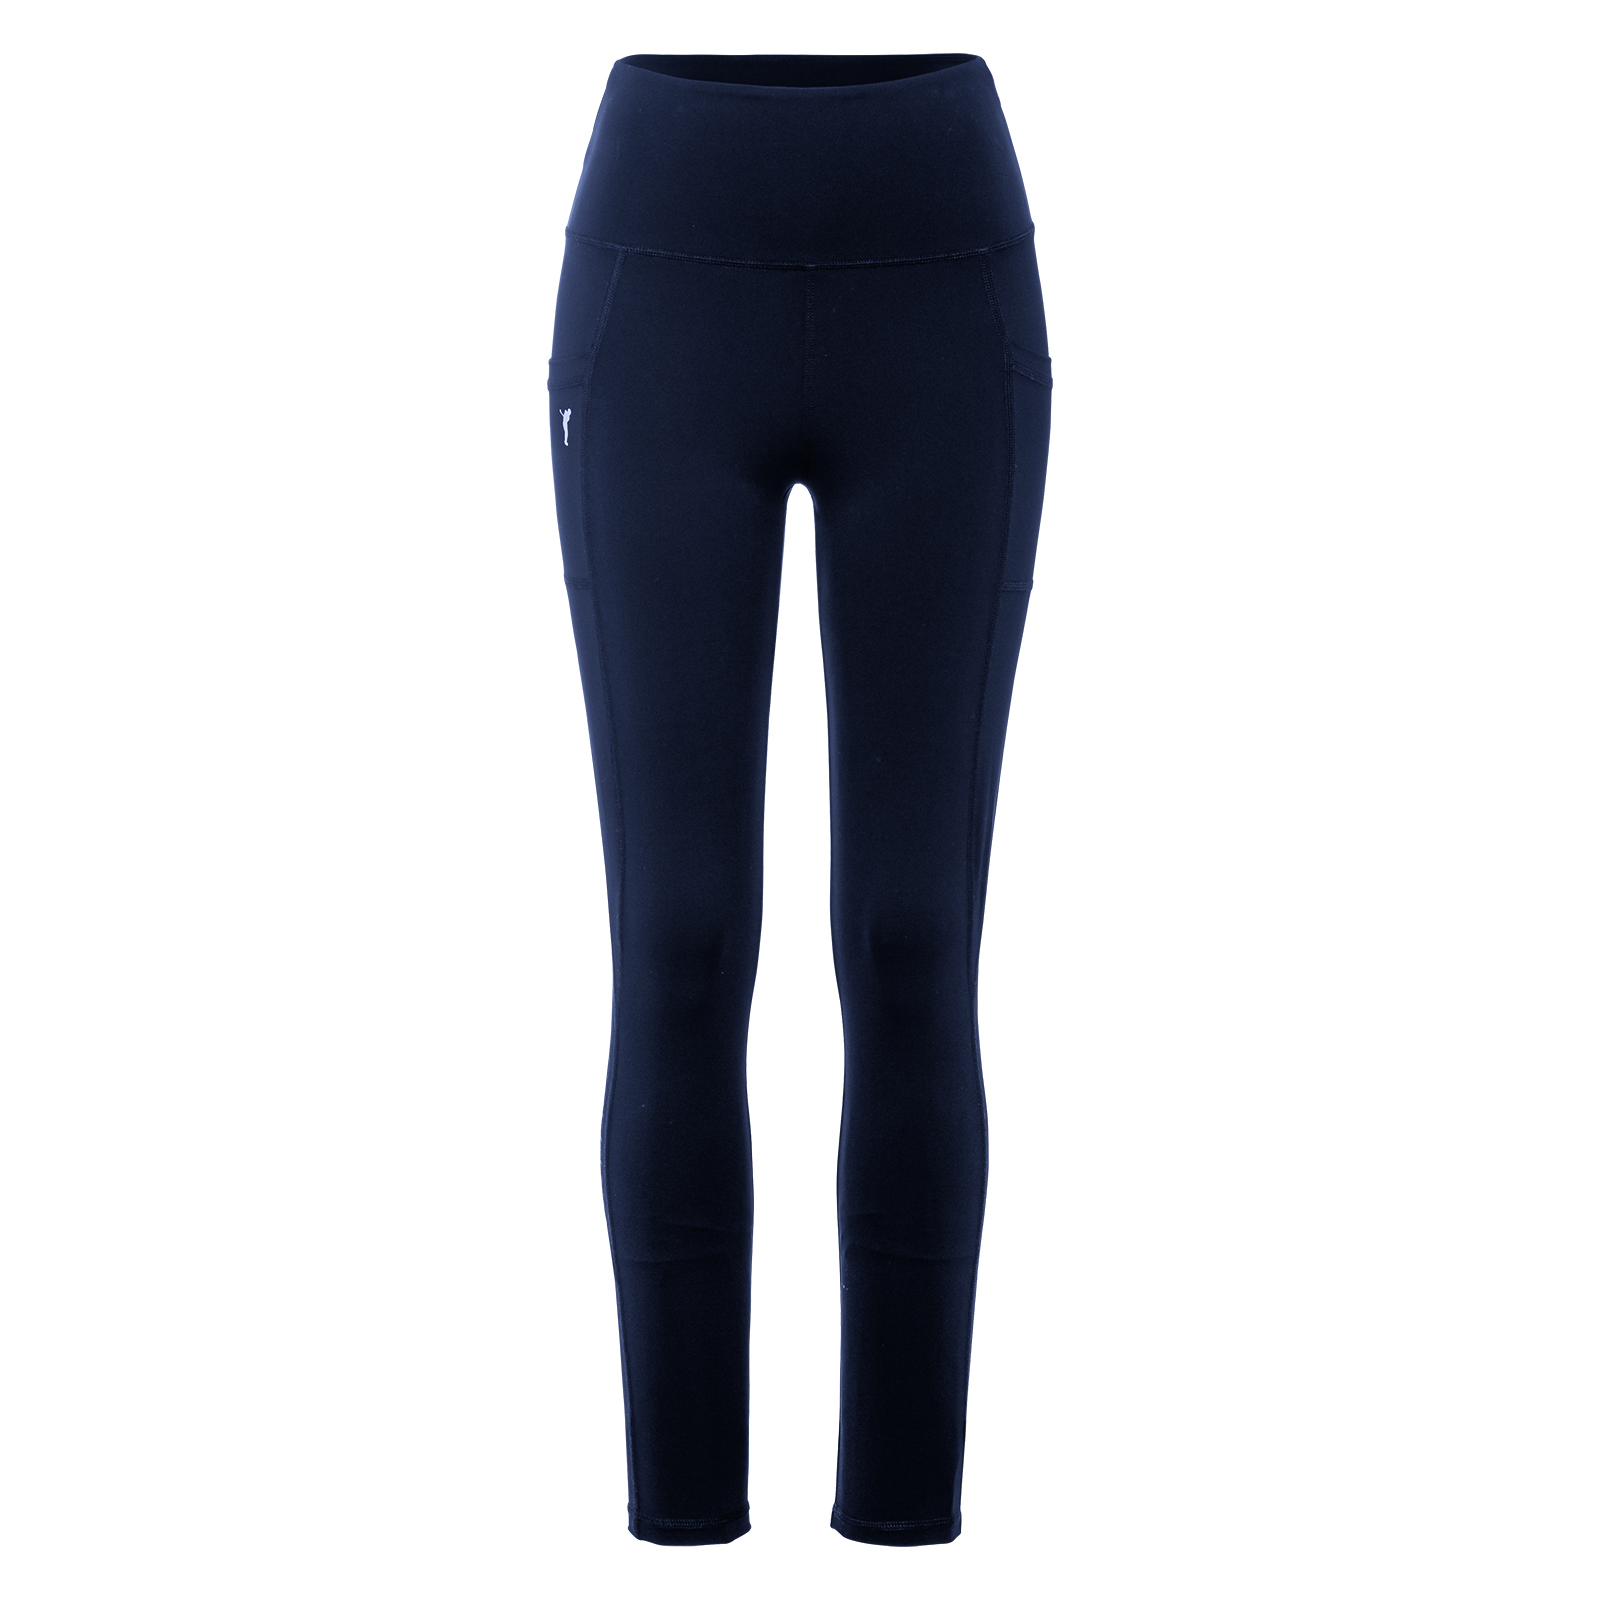 Ladies performance leggings with side pockets. 